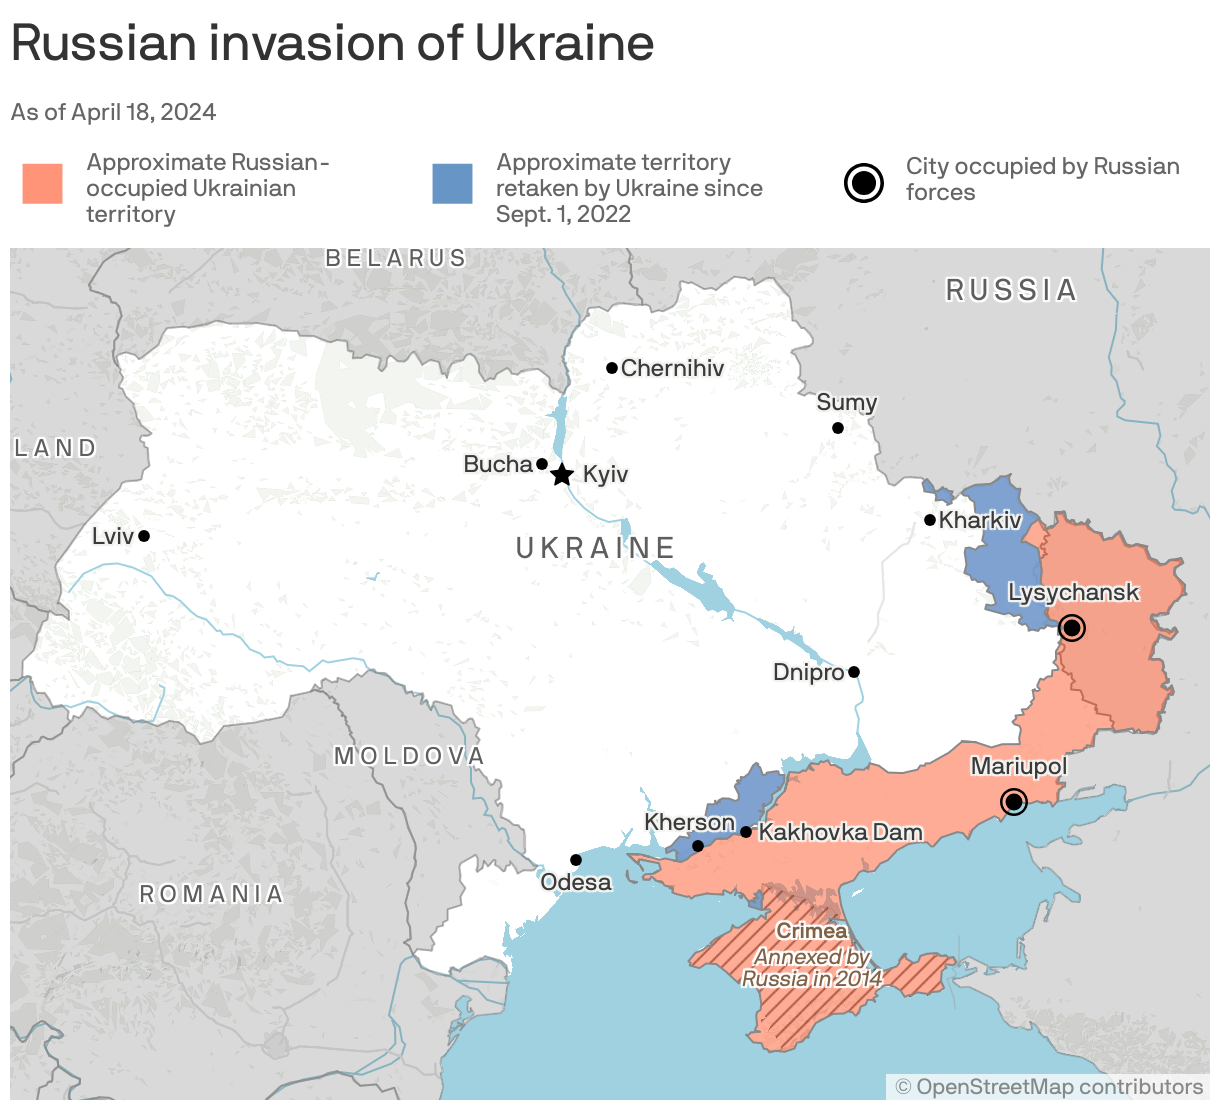 Russian invasion of Ukraine, as of March 27